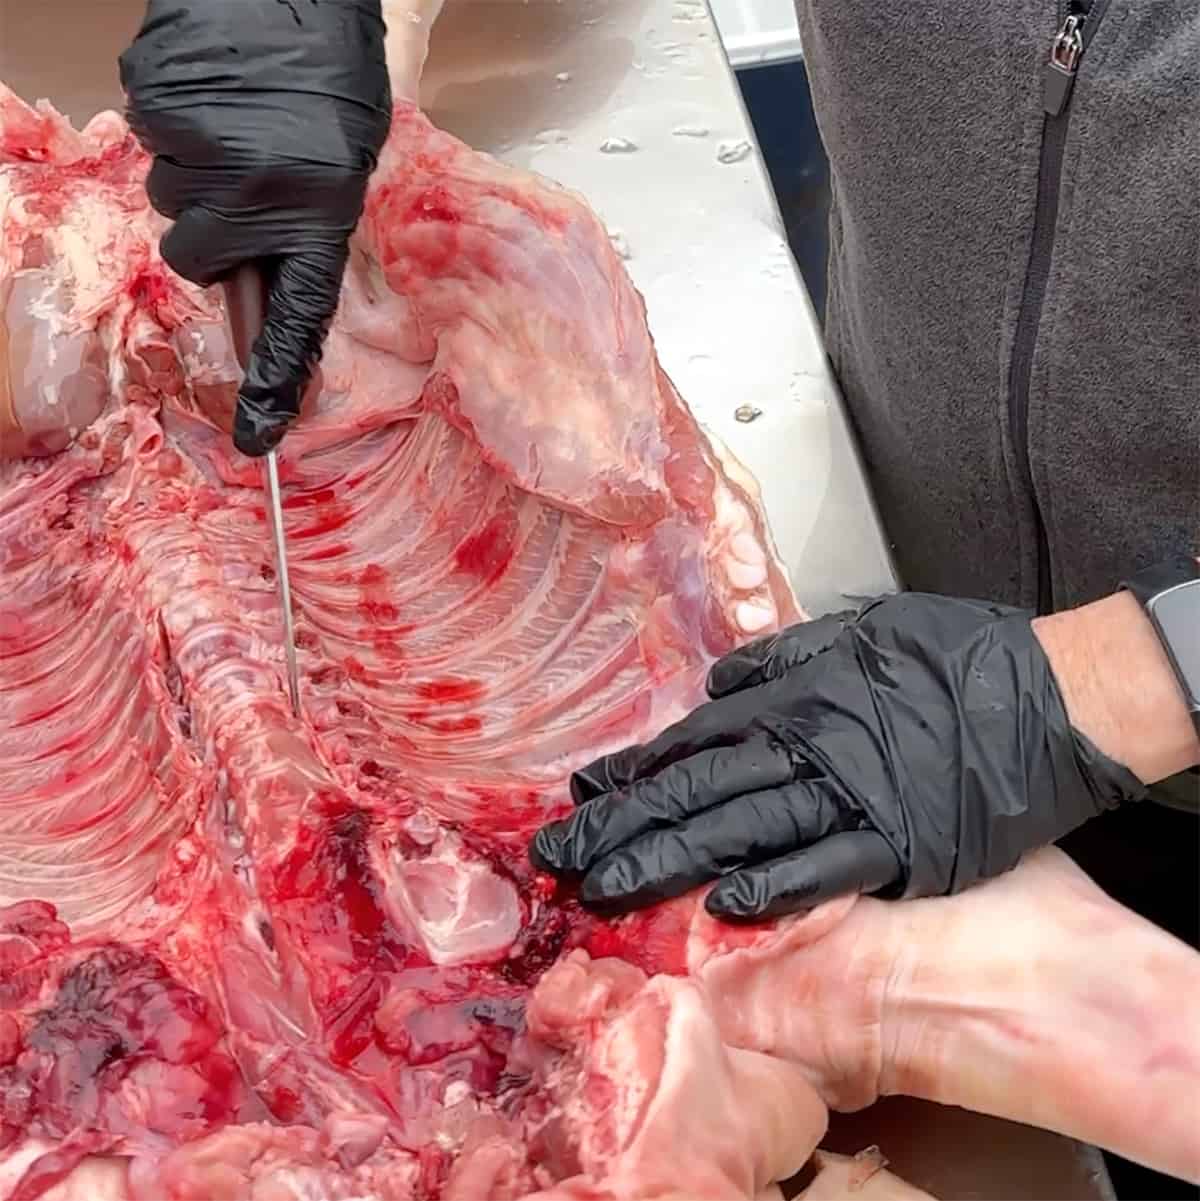 Running knife along spine to separate four ribs.